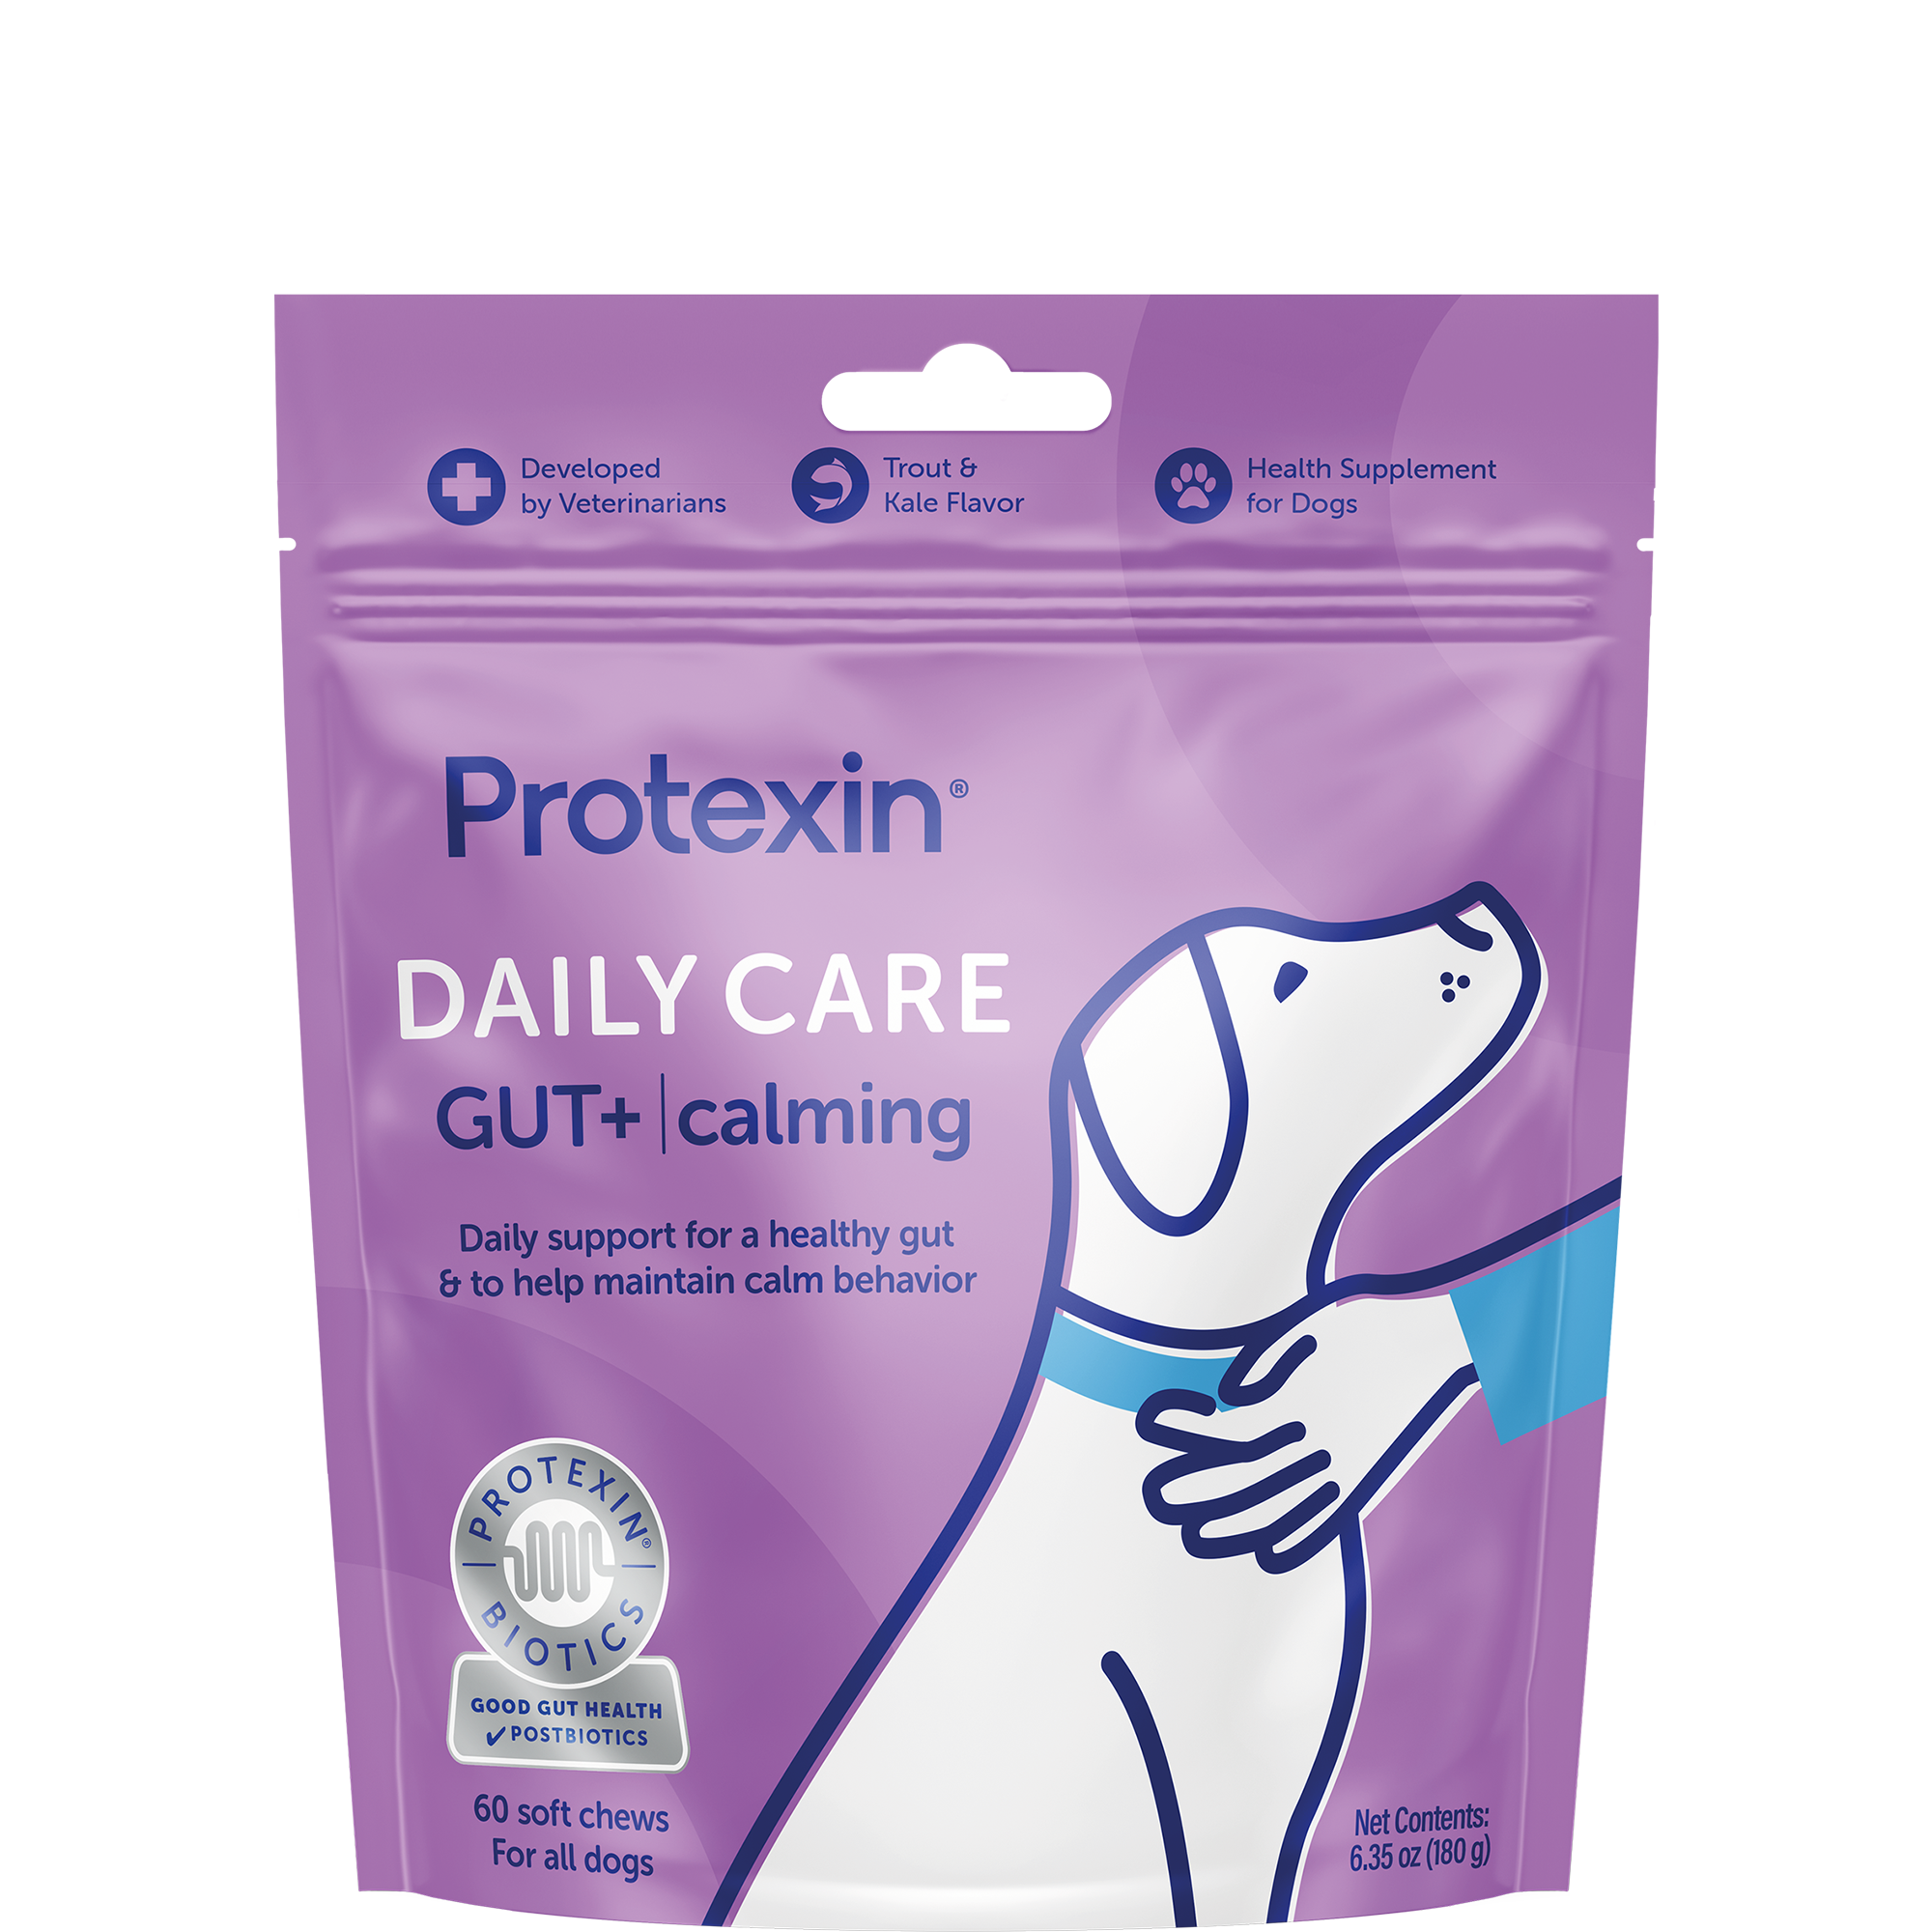 Protexin Daily Care Gut+ Wellness